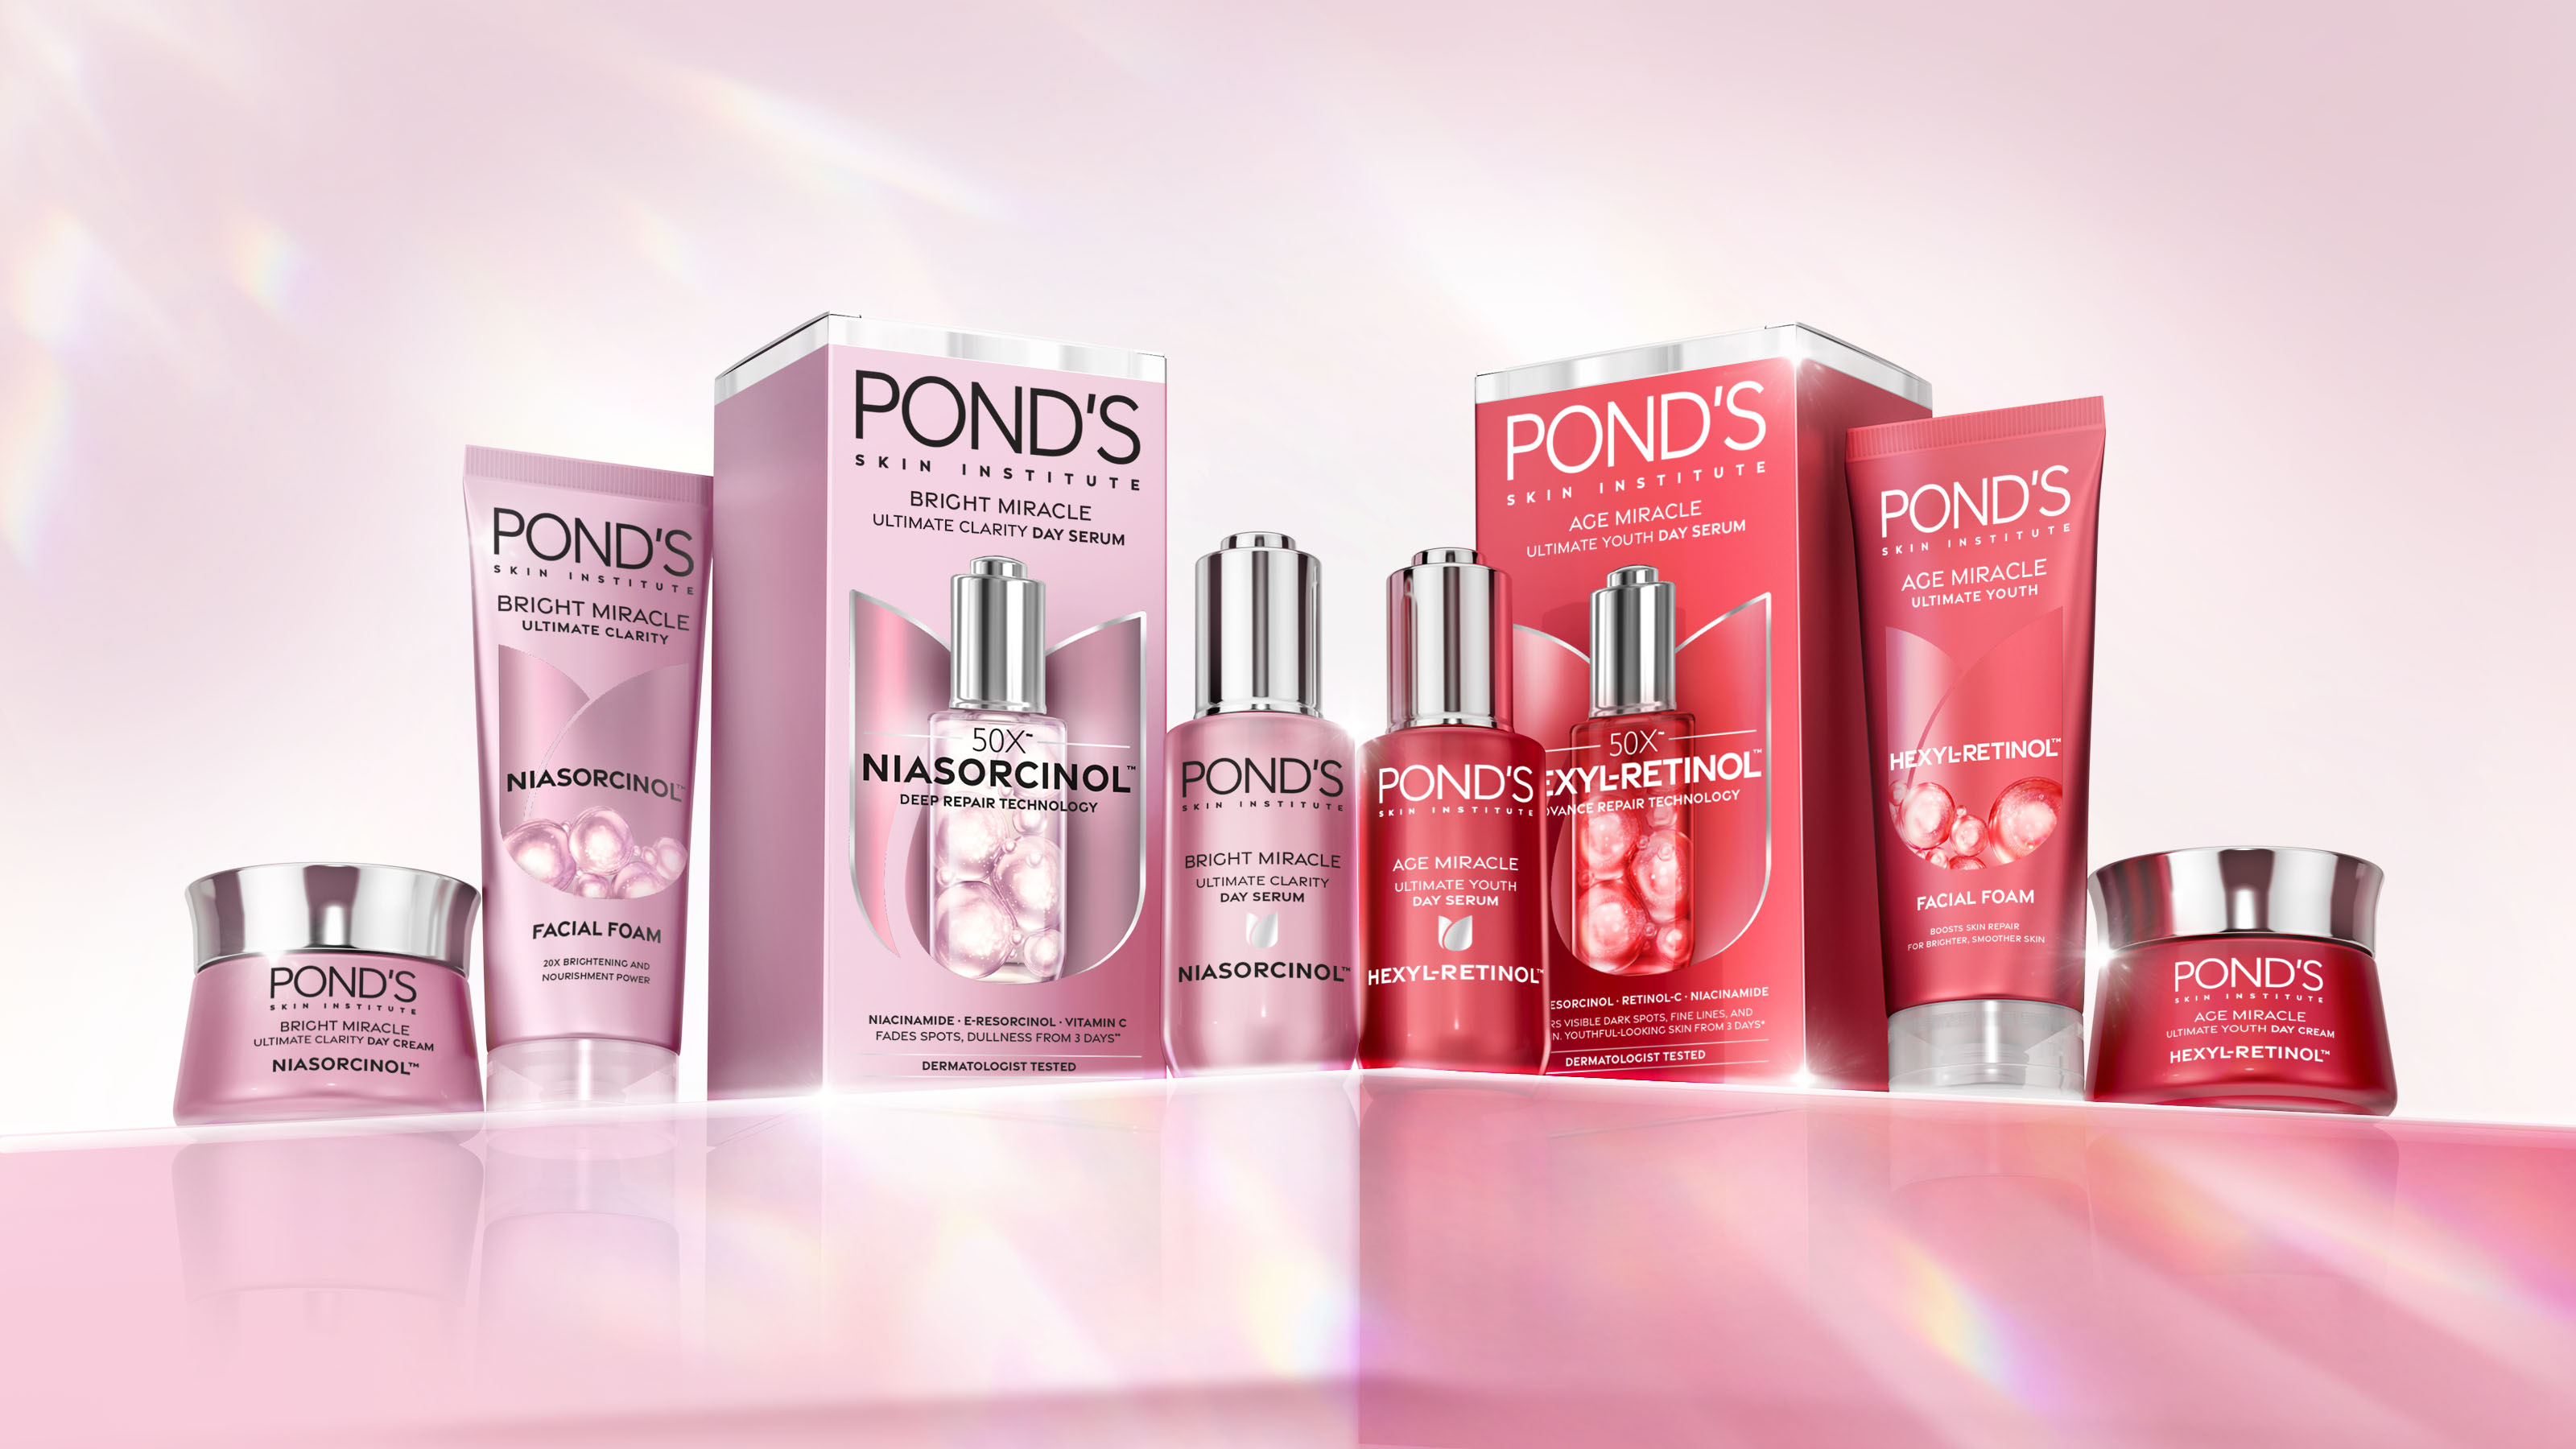 POND’S Skin Institute Re-establishes Relevance, Credibility and Desire with 1HQ Singapore